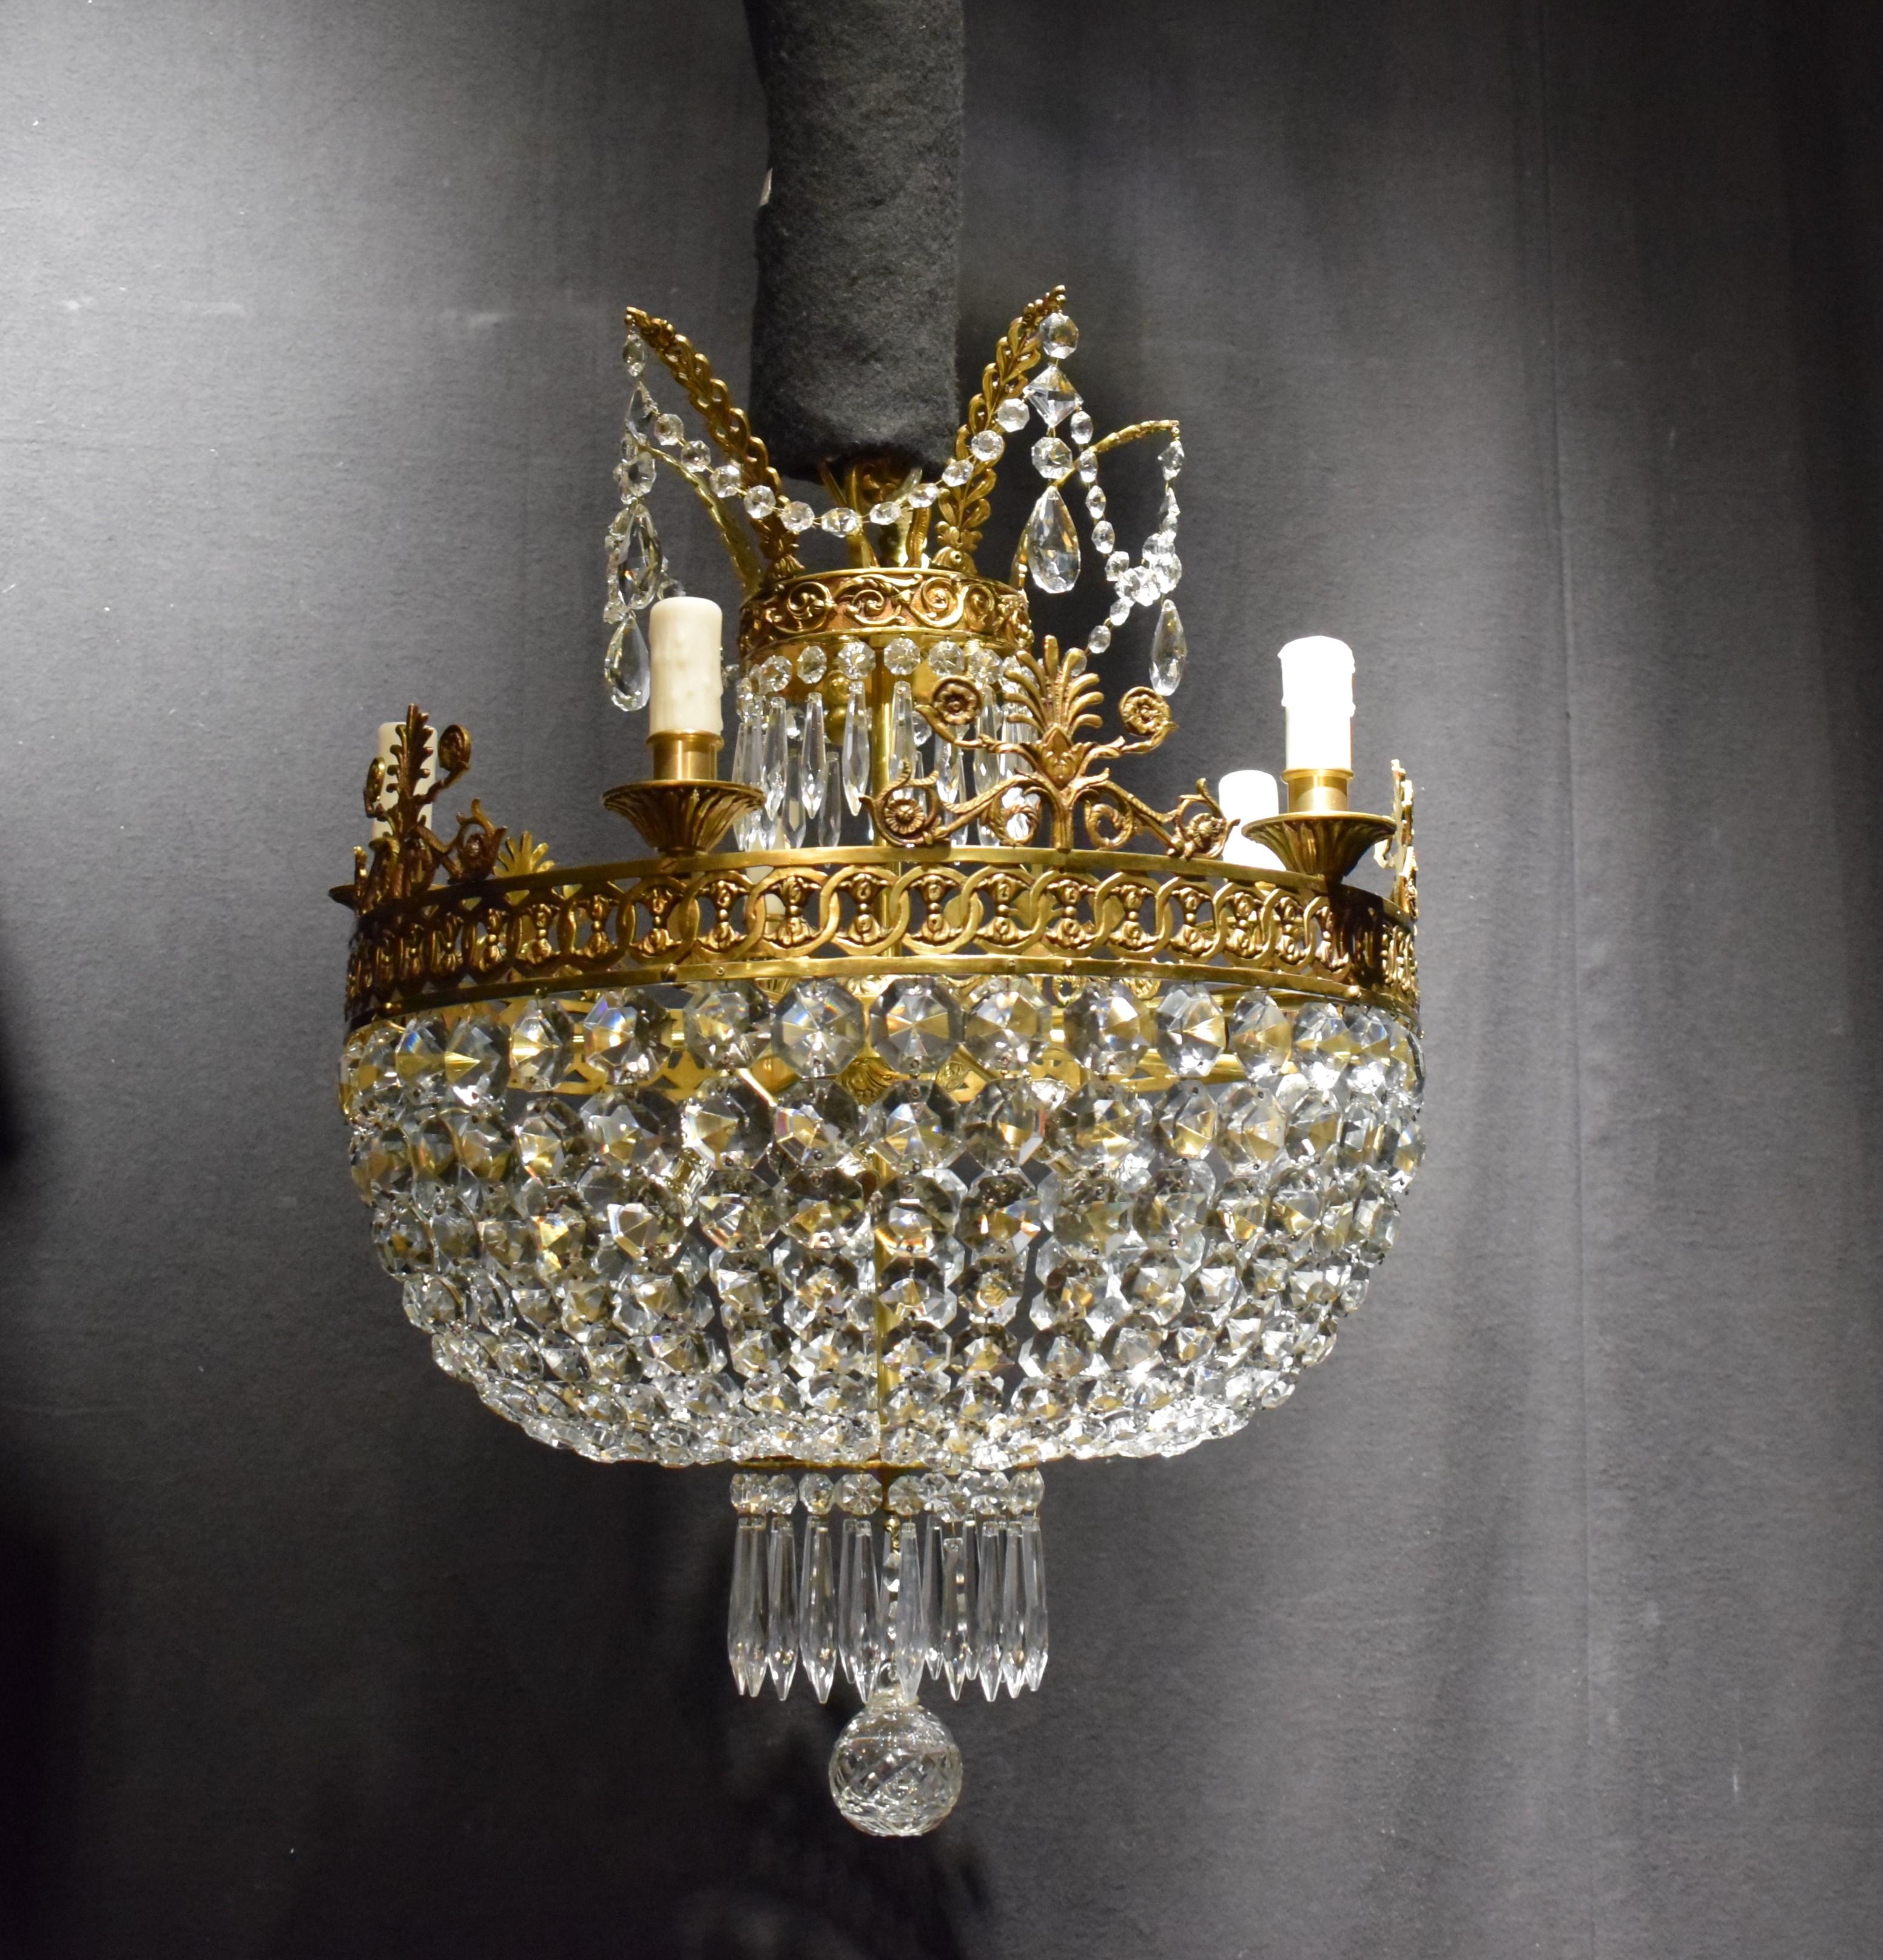 A Fine and Decorative Gilt Bronze & Crystal Pendant. The Pierced gilt bronze ring issuing downwards graduated octagon graduated octagon chains, on top five lights. At the top five anthemia joined by octagon swags. France, circa 1930
CW5030